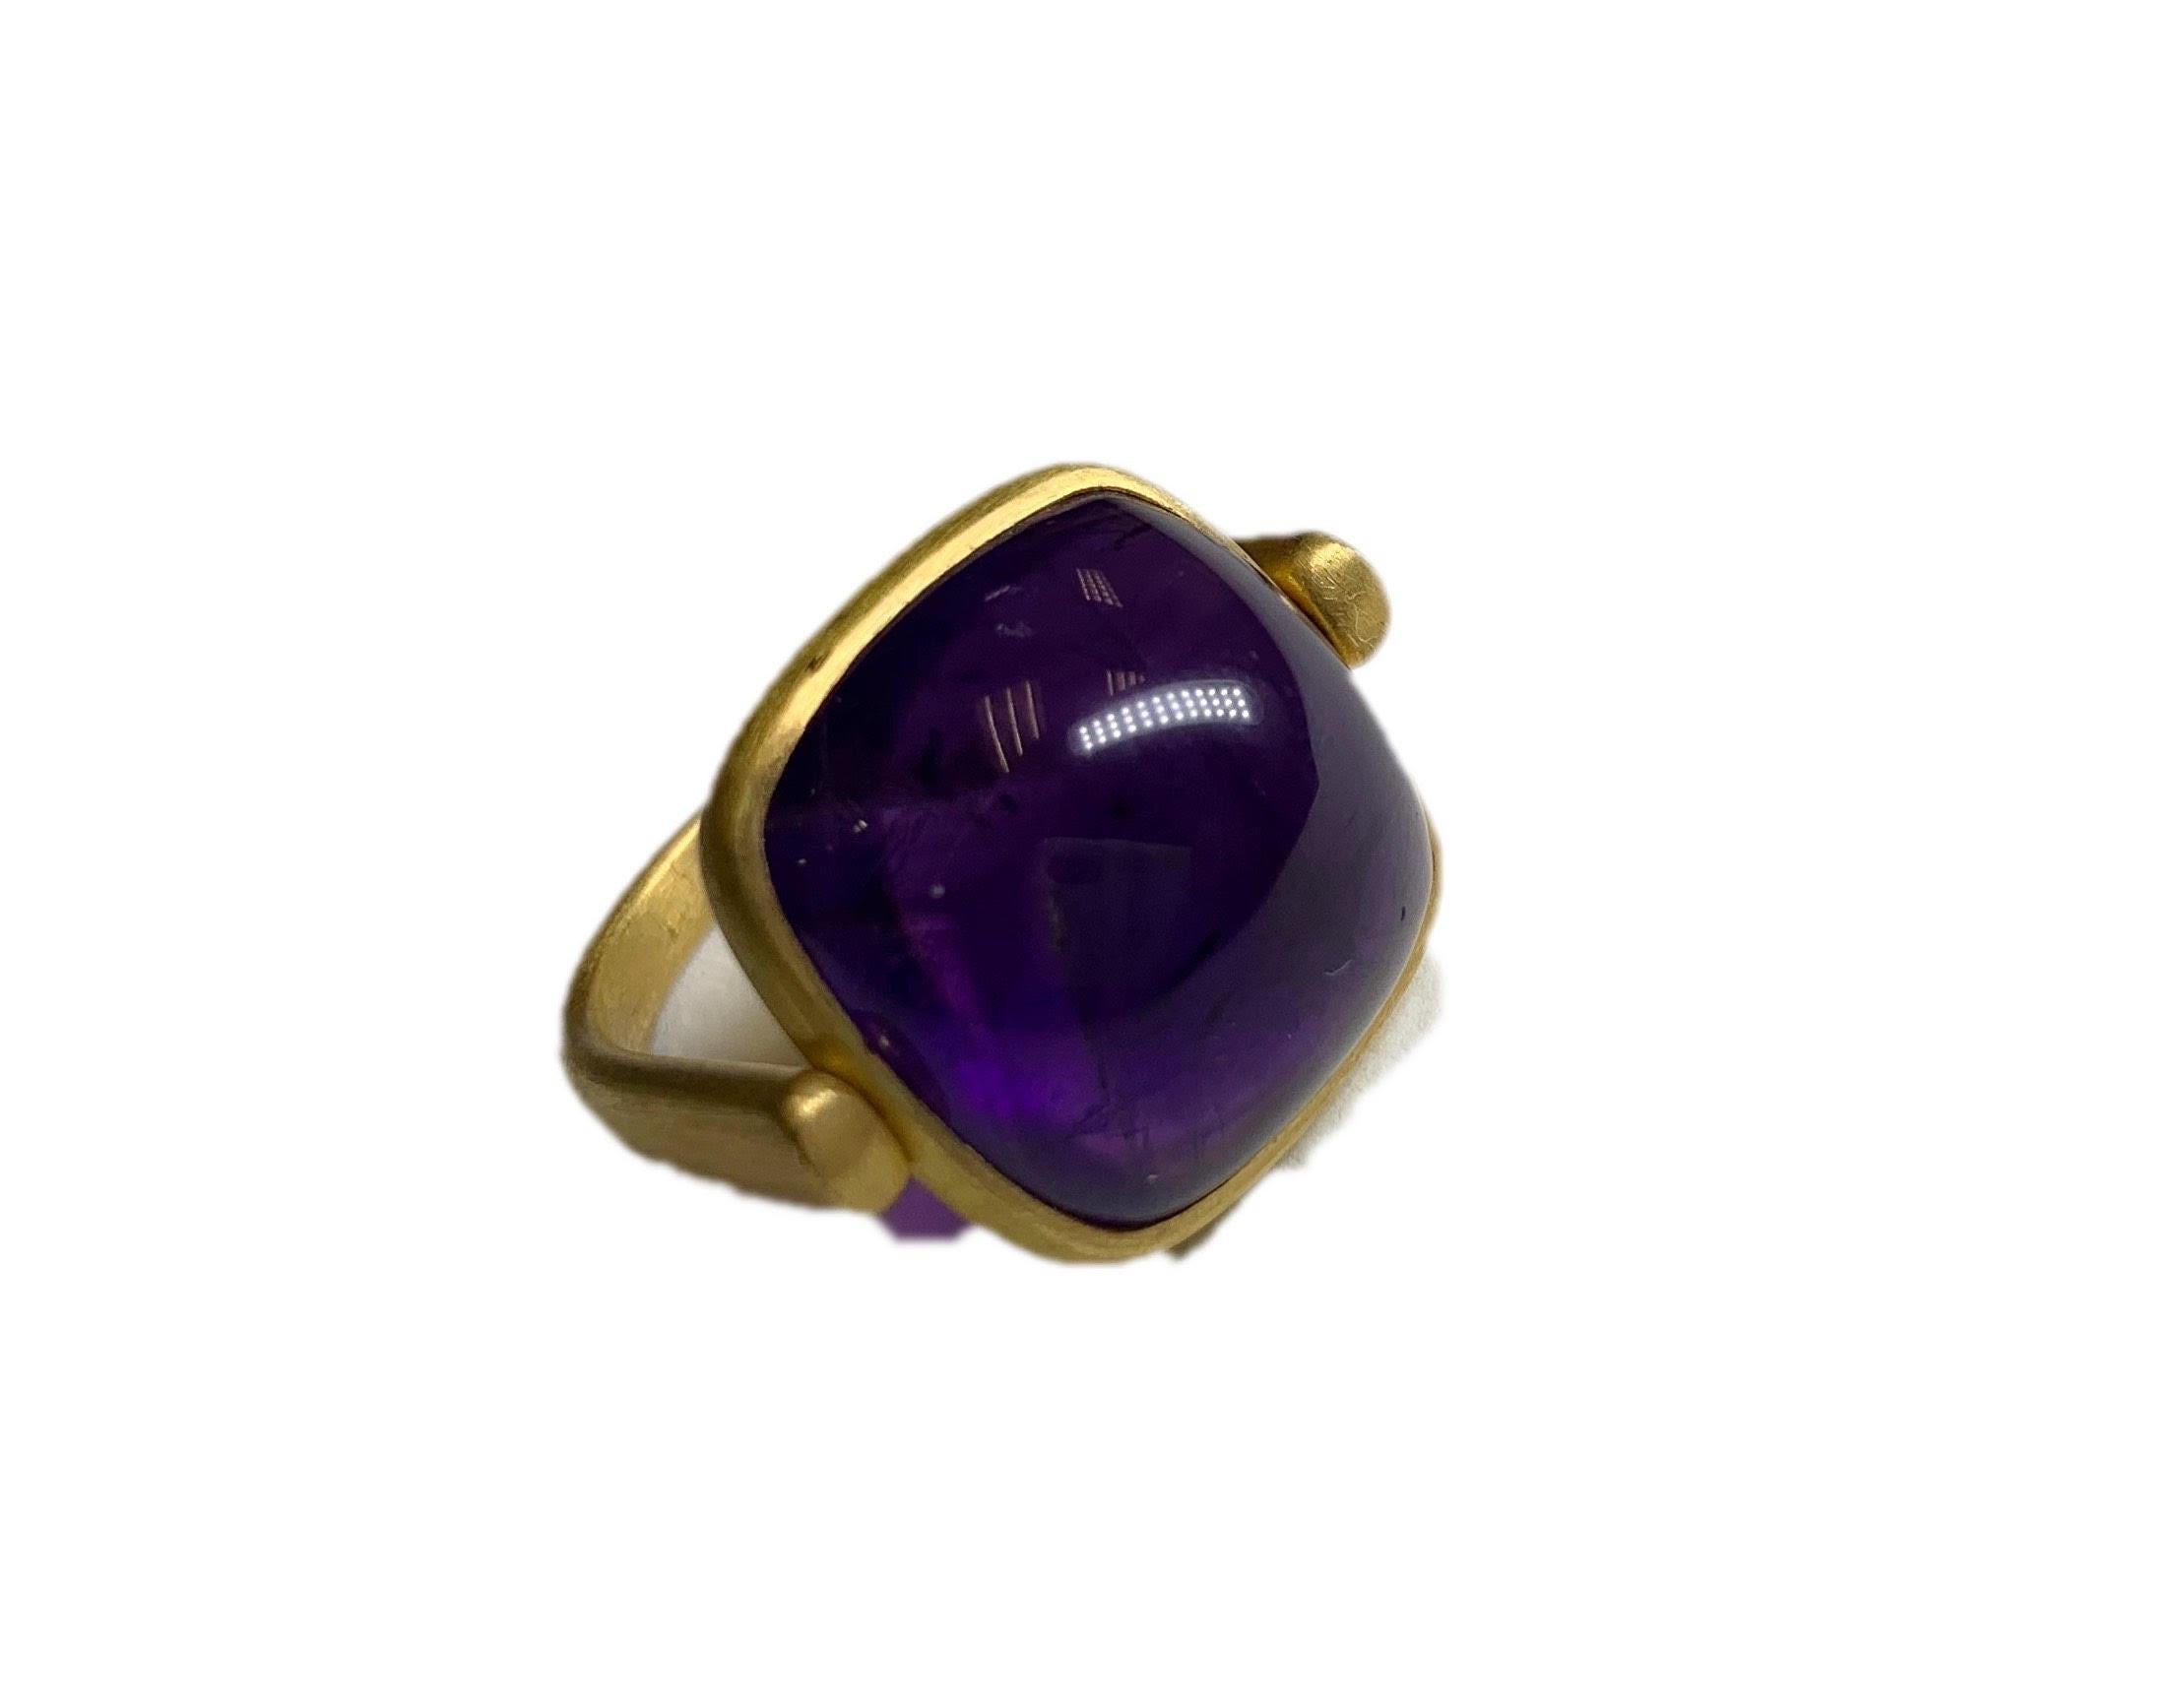 This playful cocktail ring features a 21.40 carat cabochon cut Amethyst. The center stone swivels independently from the rest of the ring as a design feature. The gold is 22 Karat Yellow Gold with a soft satin finish. 

A2 by Arunashi Amethyst Flip